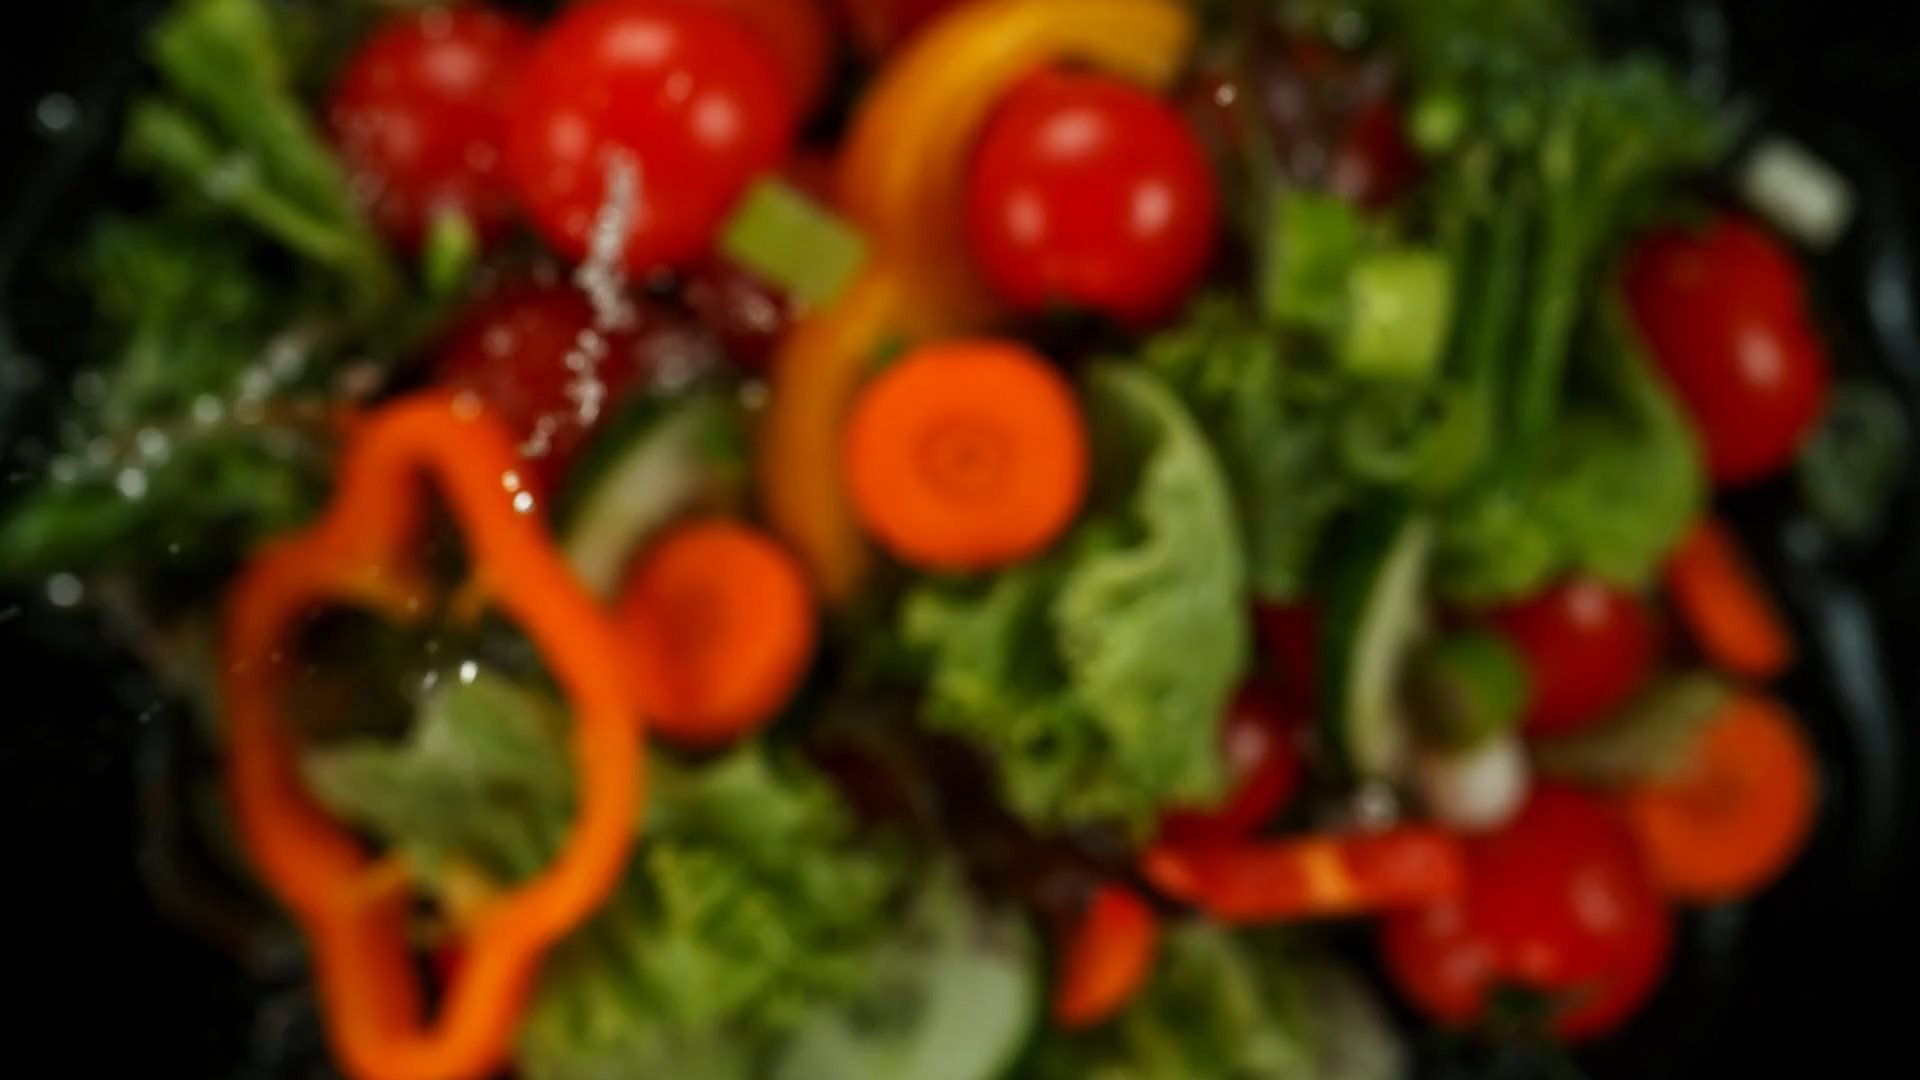 Video of fresh vegetables with a splash